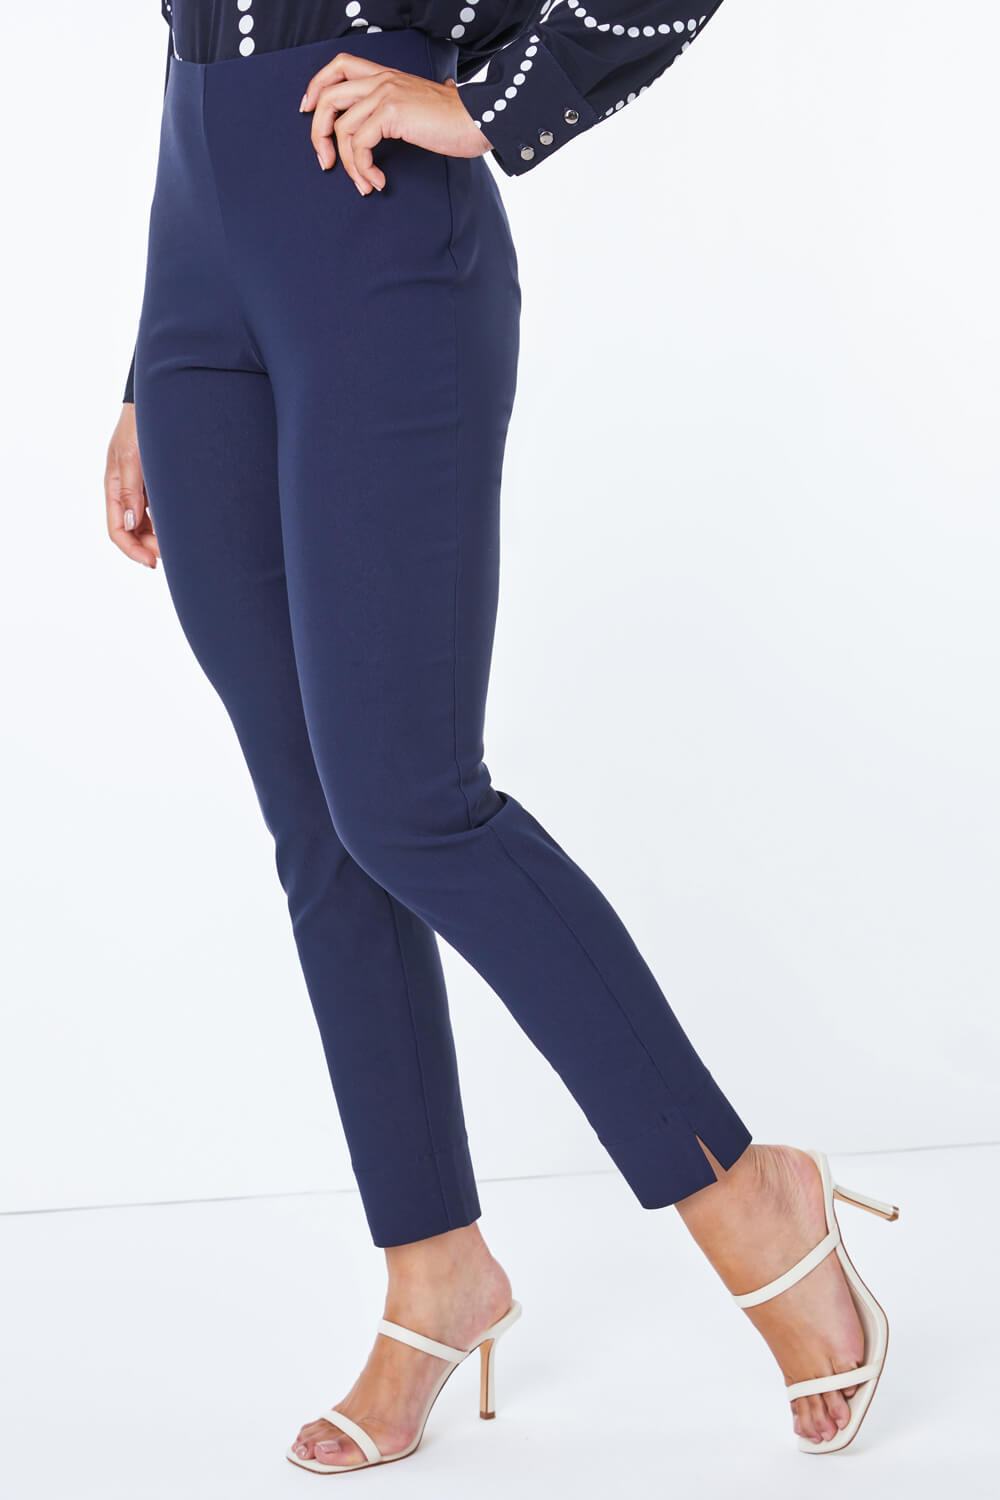 Navy  Petite Full Length Stretch Trousers, Image 4 of 4